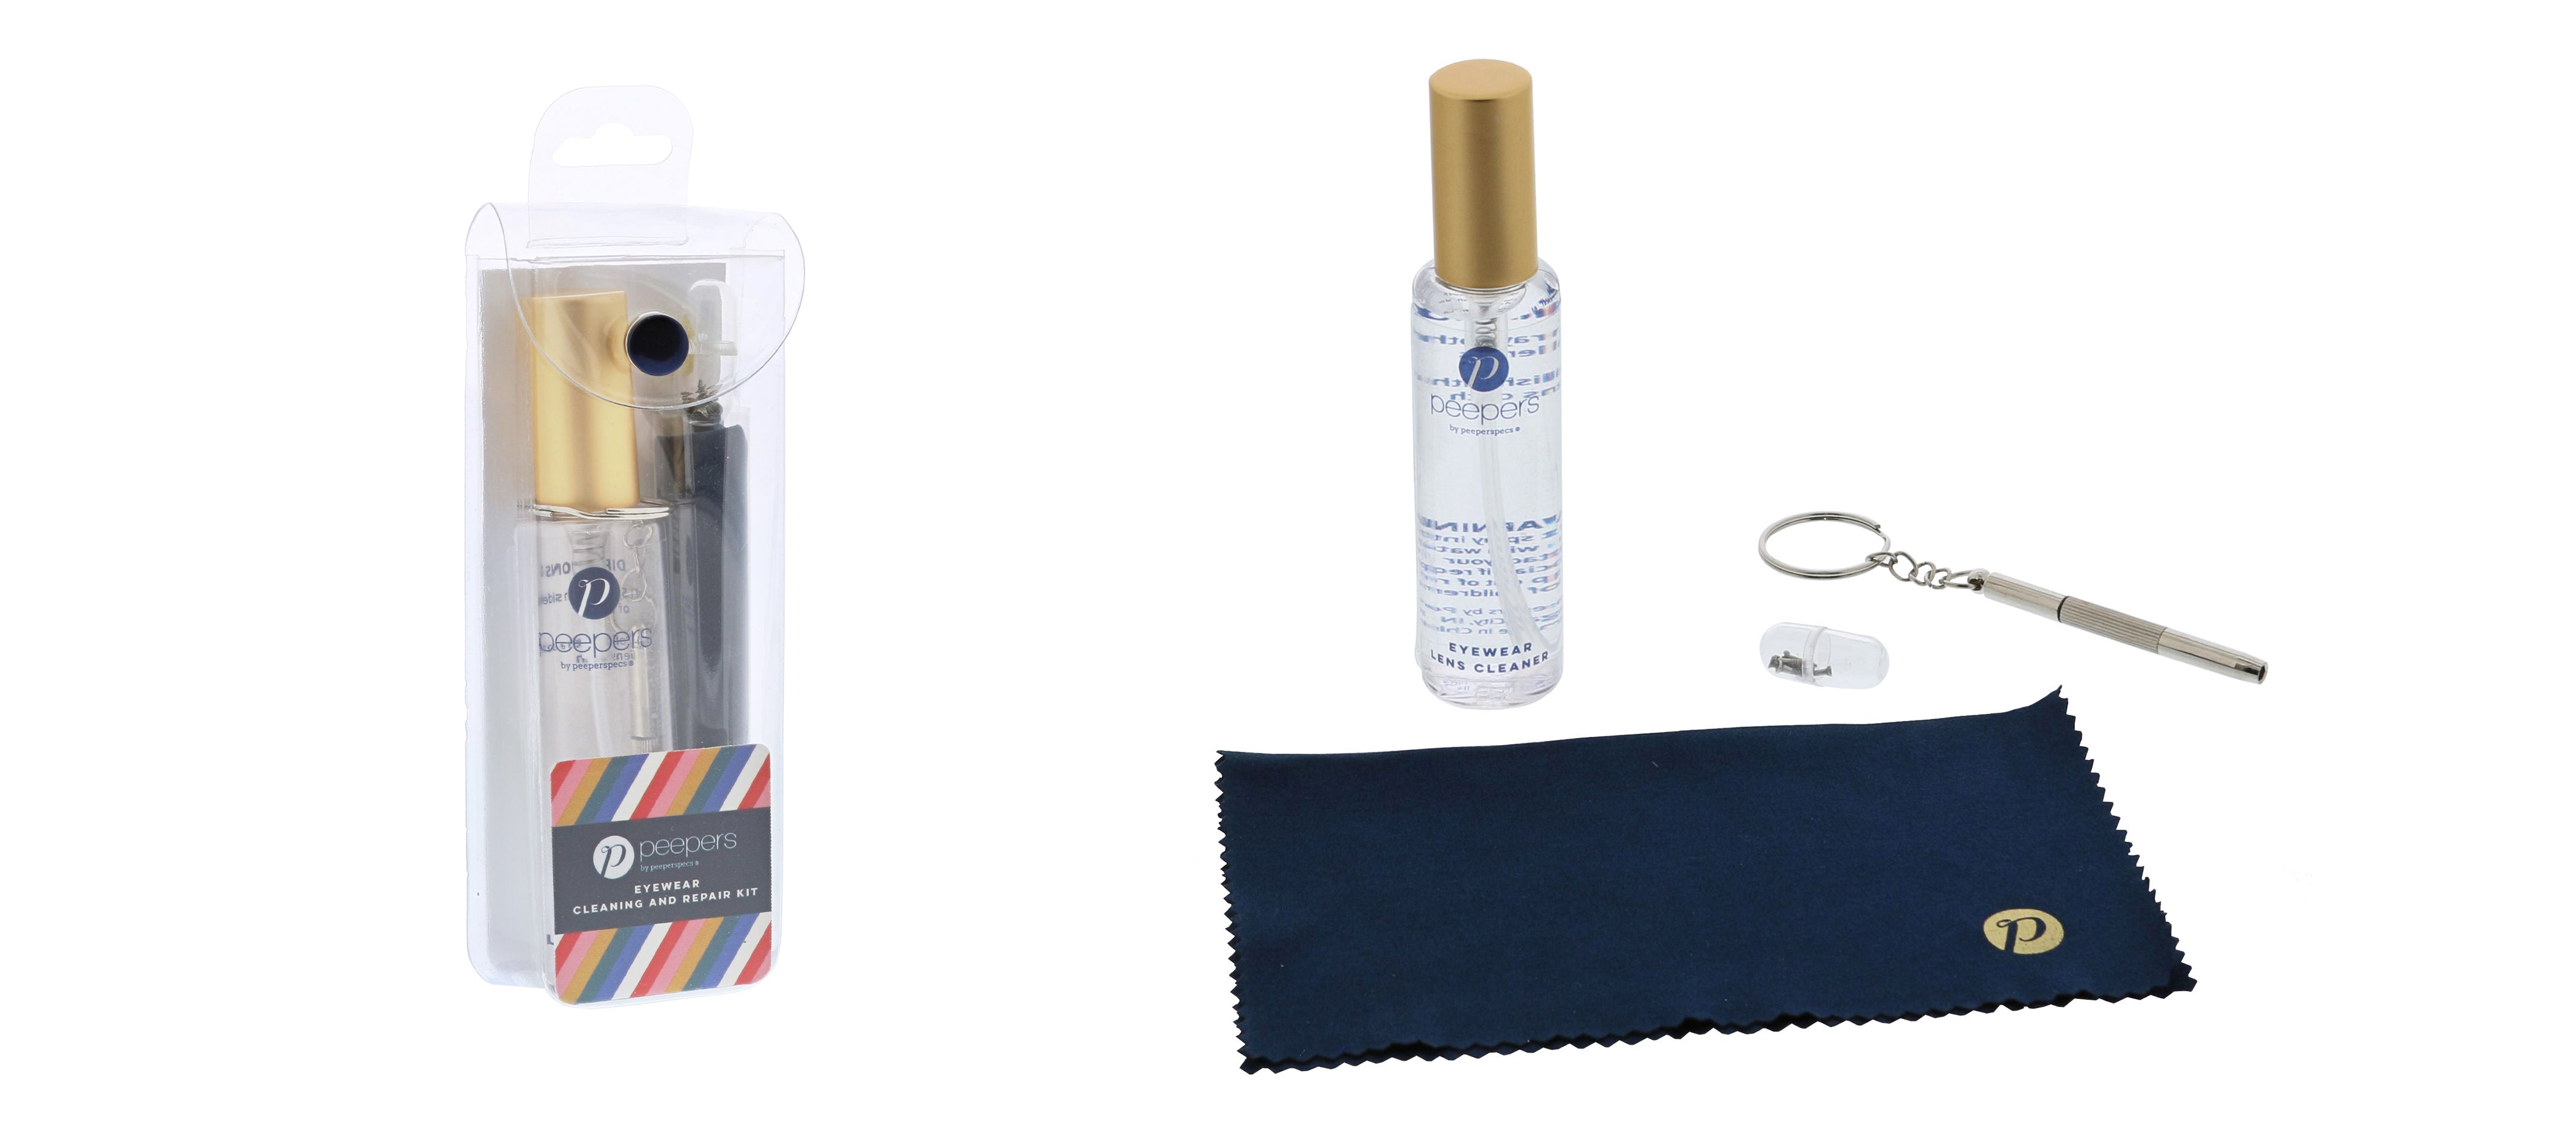 Peepers cleaning kit for eyeglasses